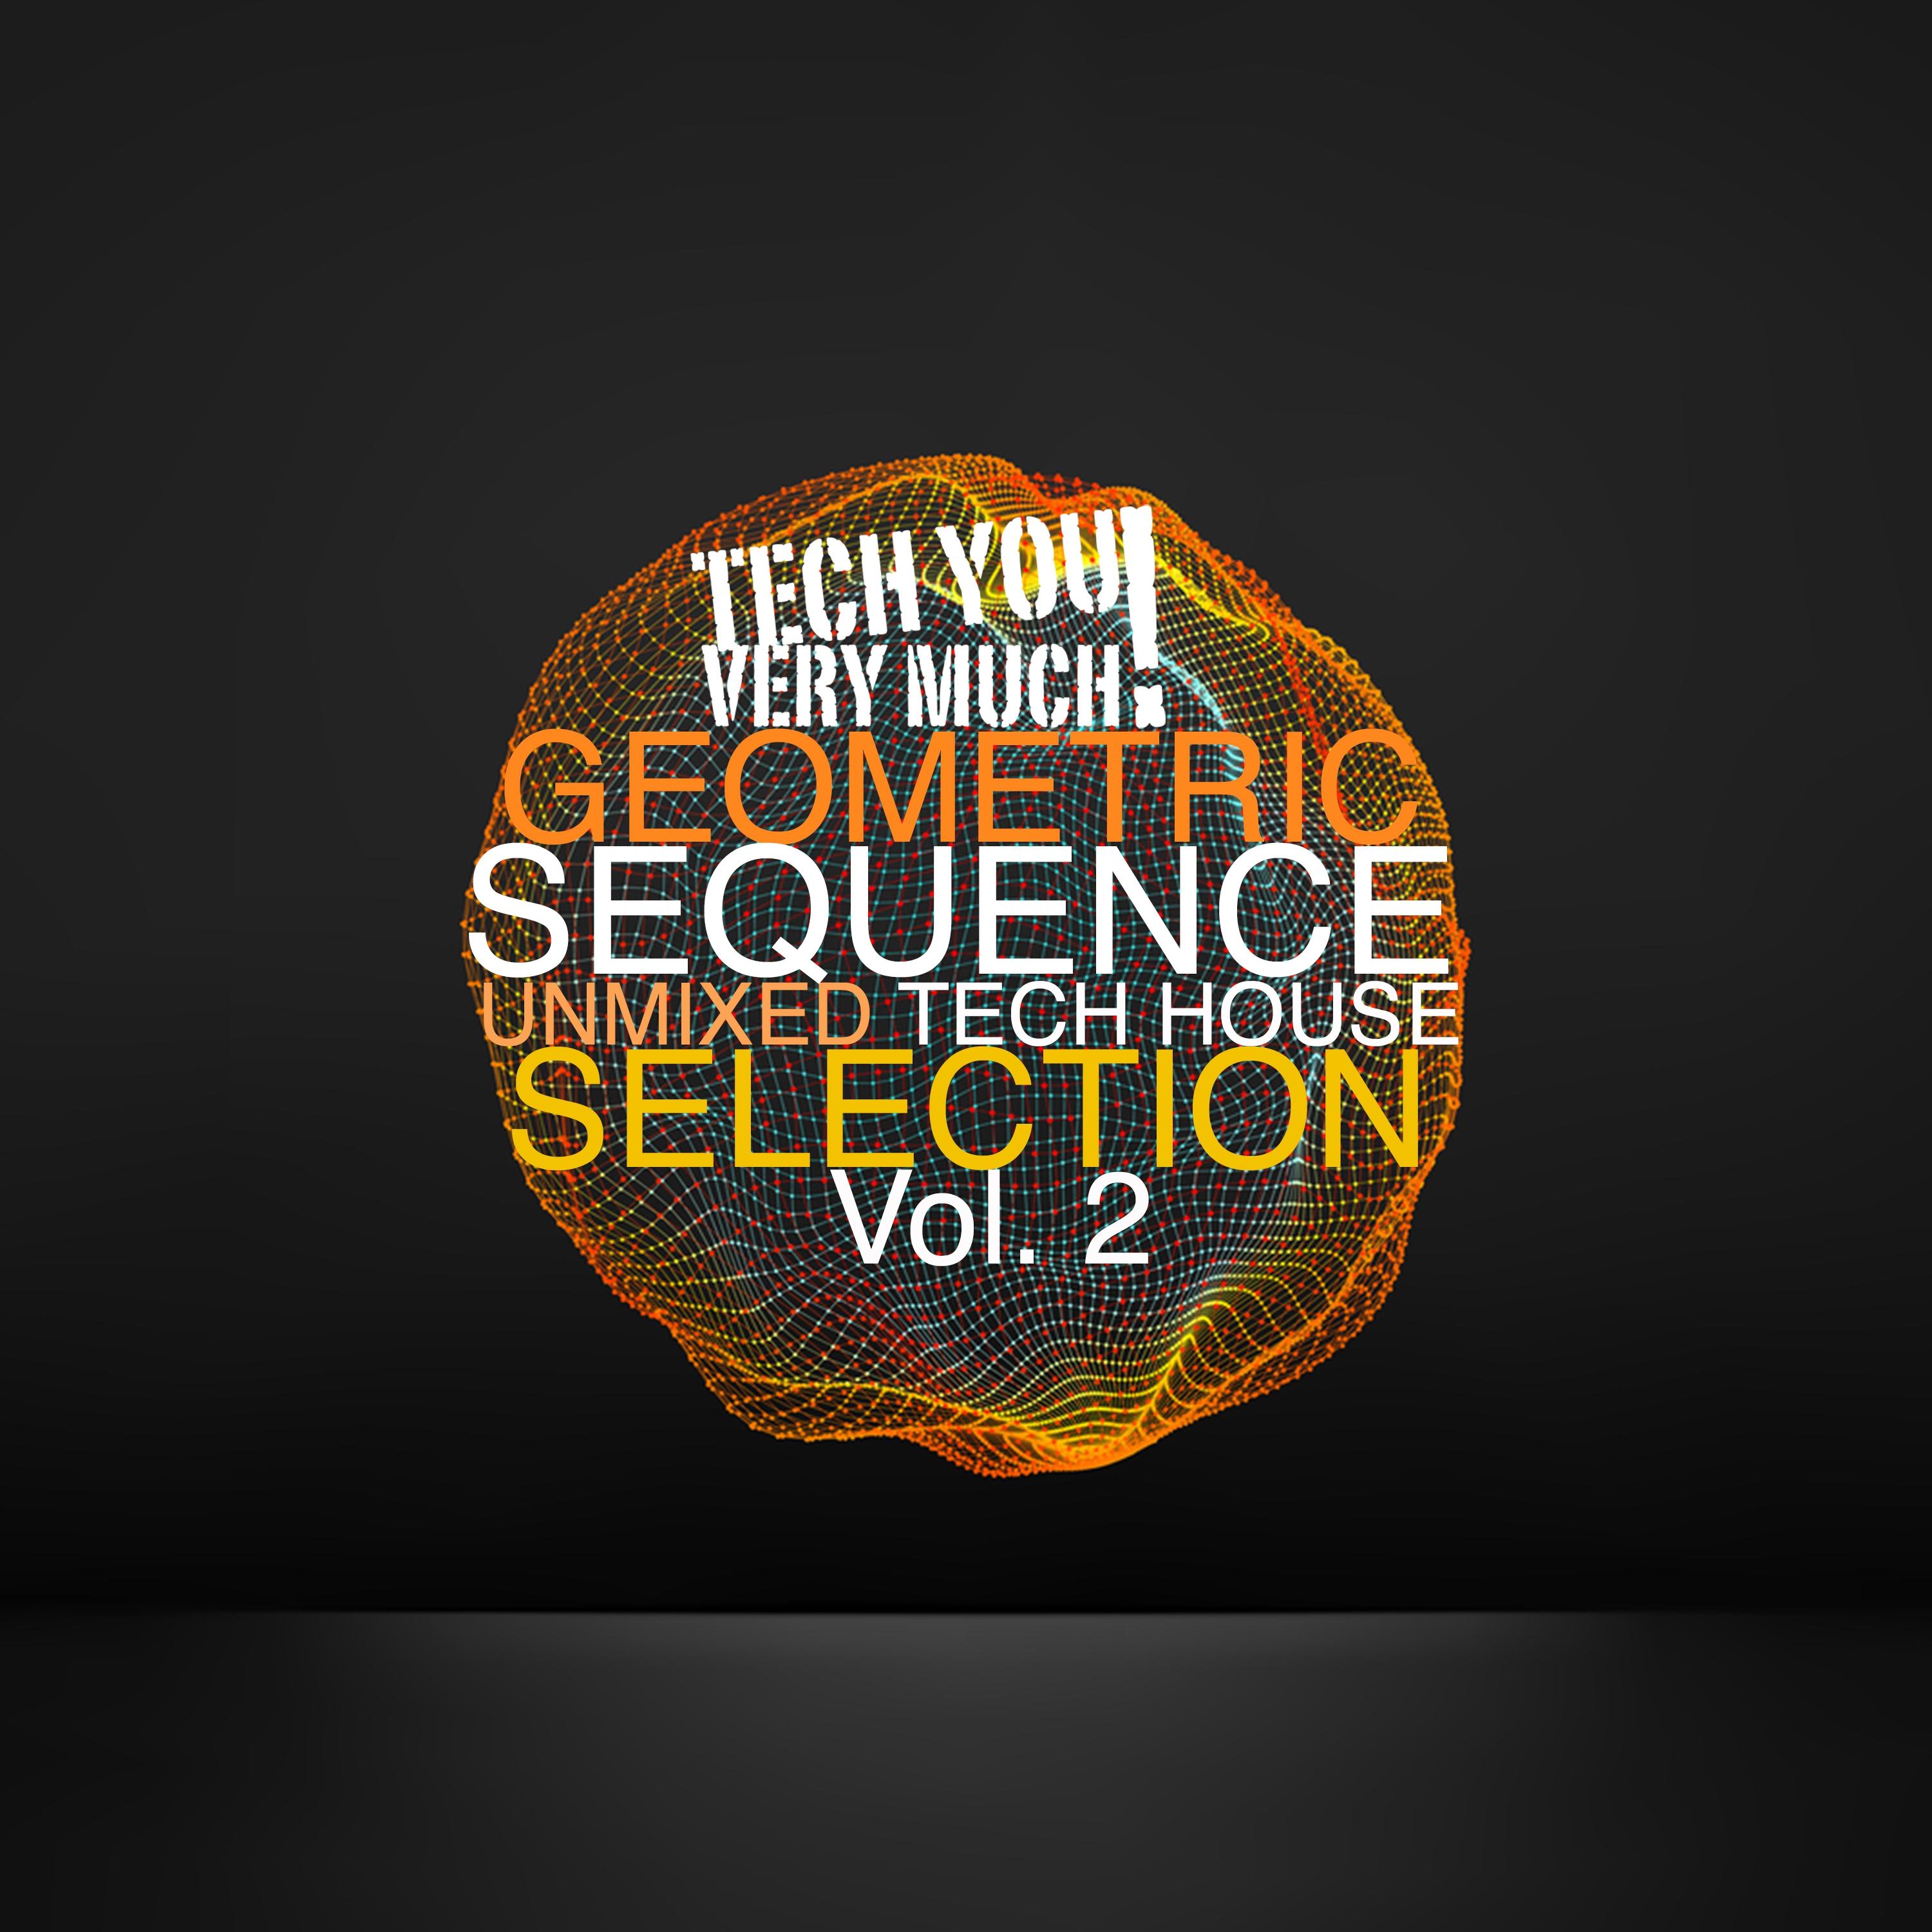 Geometric Sequence, Vol. 2 (Unmixed Tech House Selection)